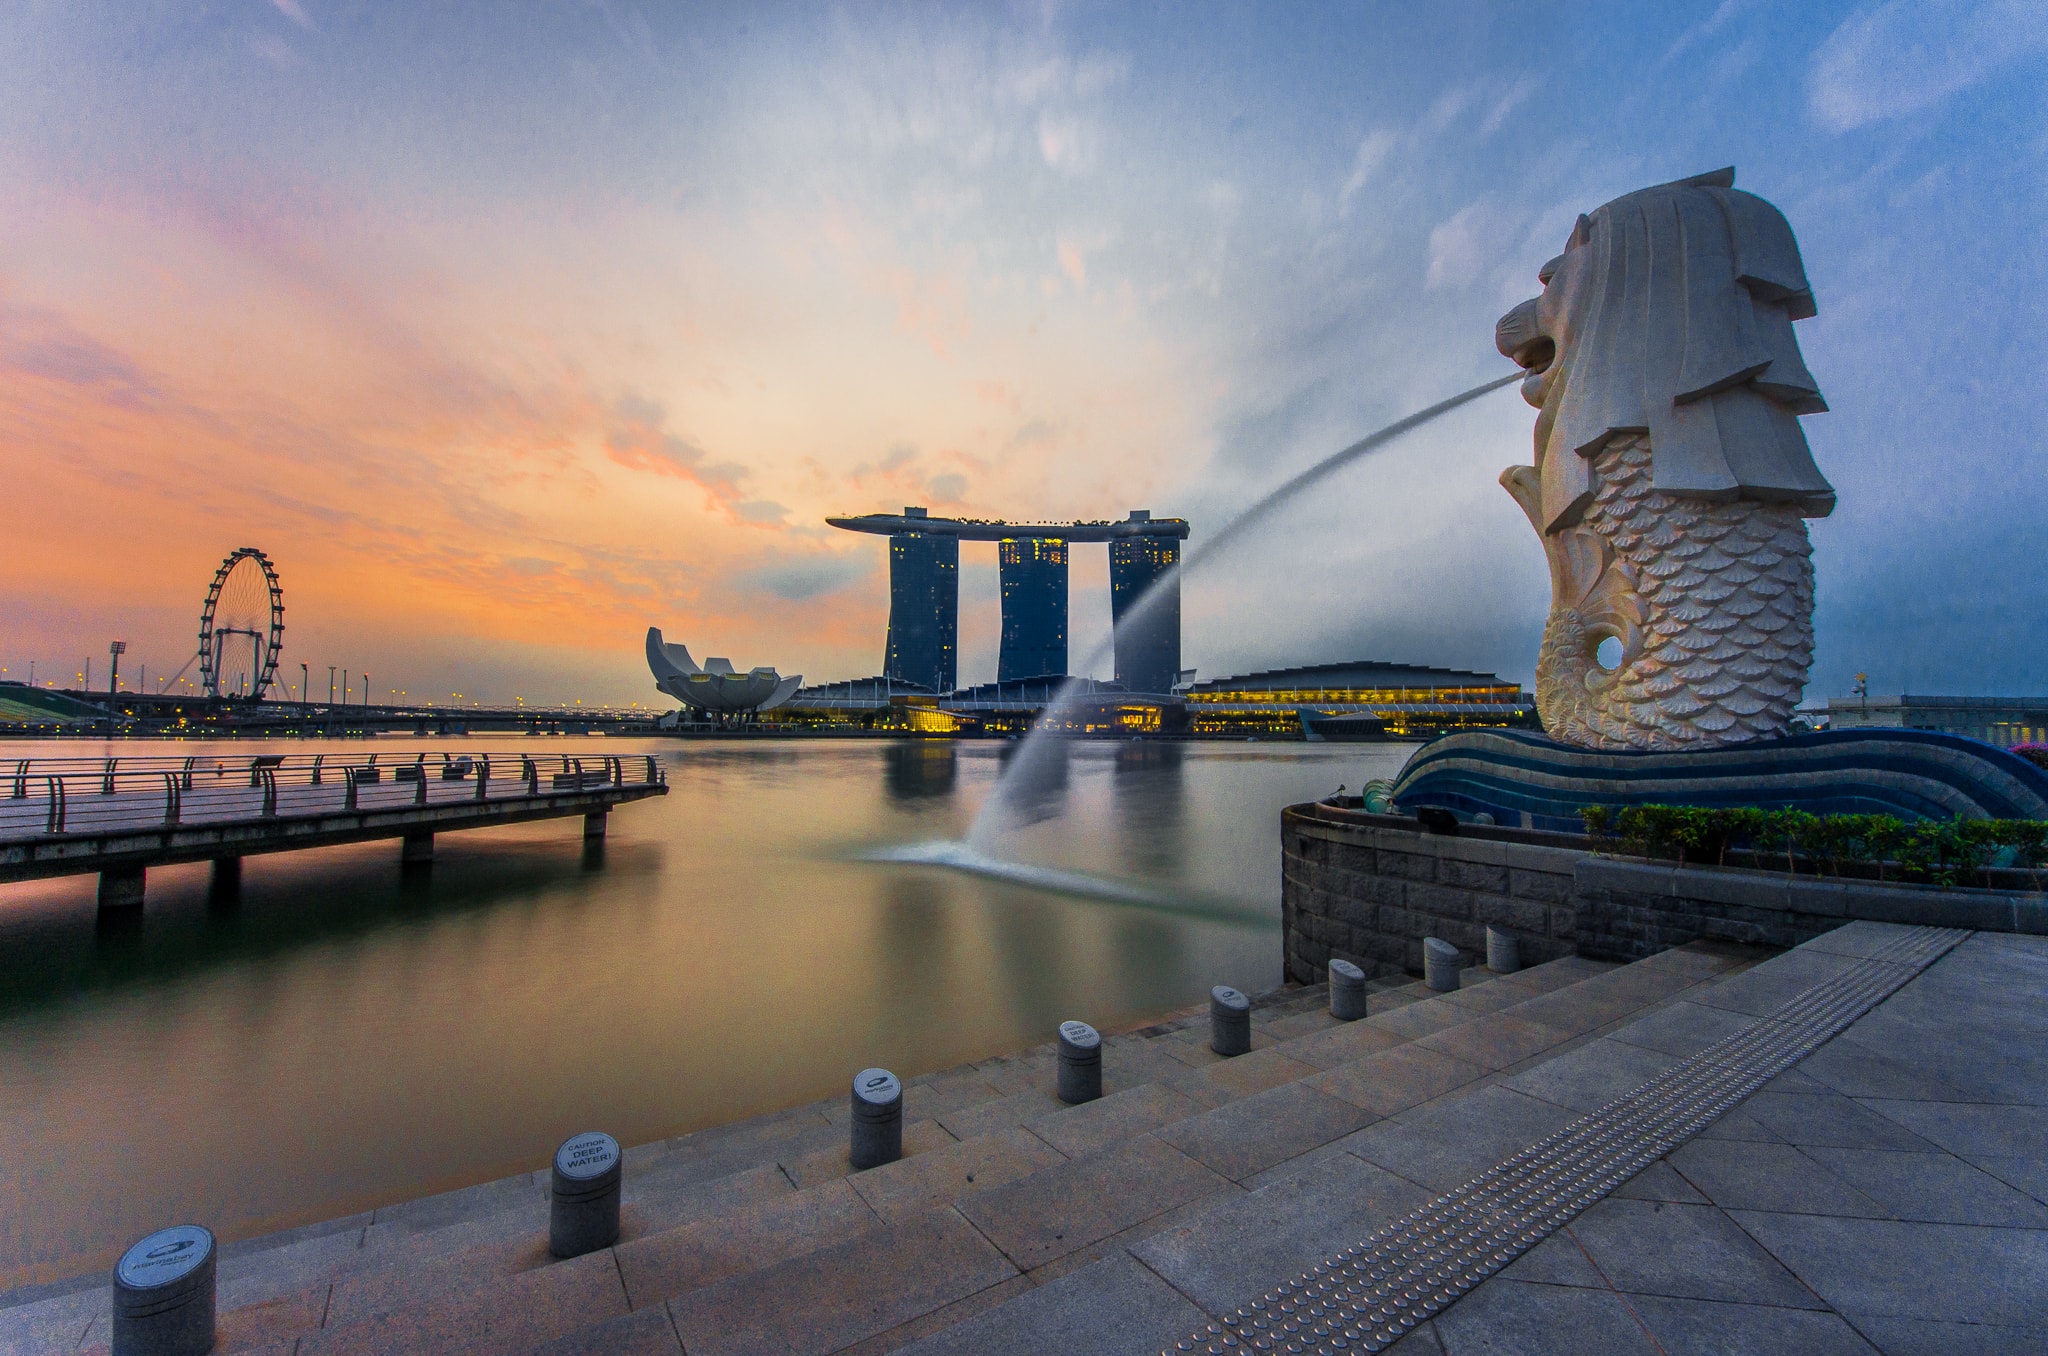 rear_view_of_the_merlion_statue_at_merlion_park_singapore_with_marina_bay_sands_in_the_distance_-_20140307-min